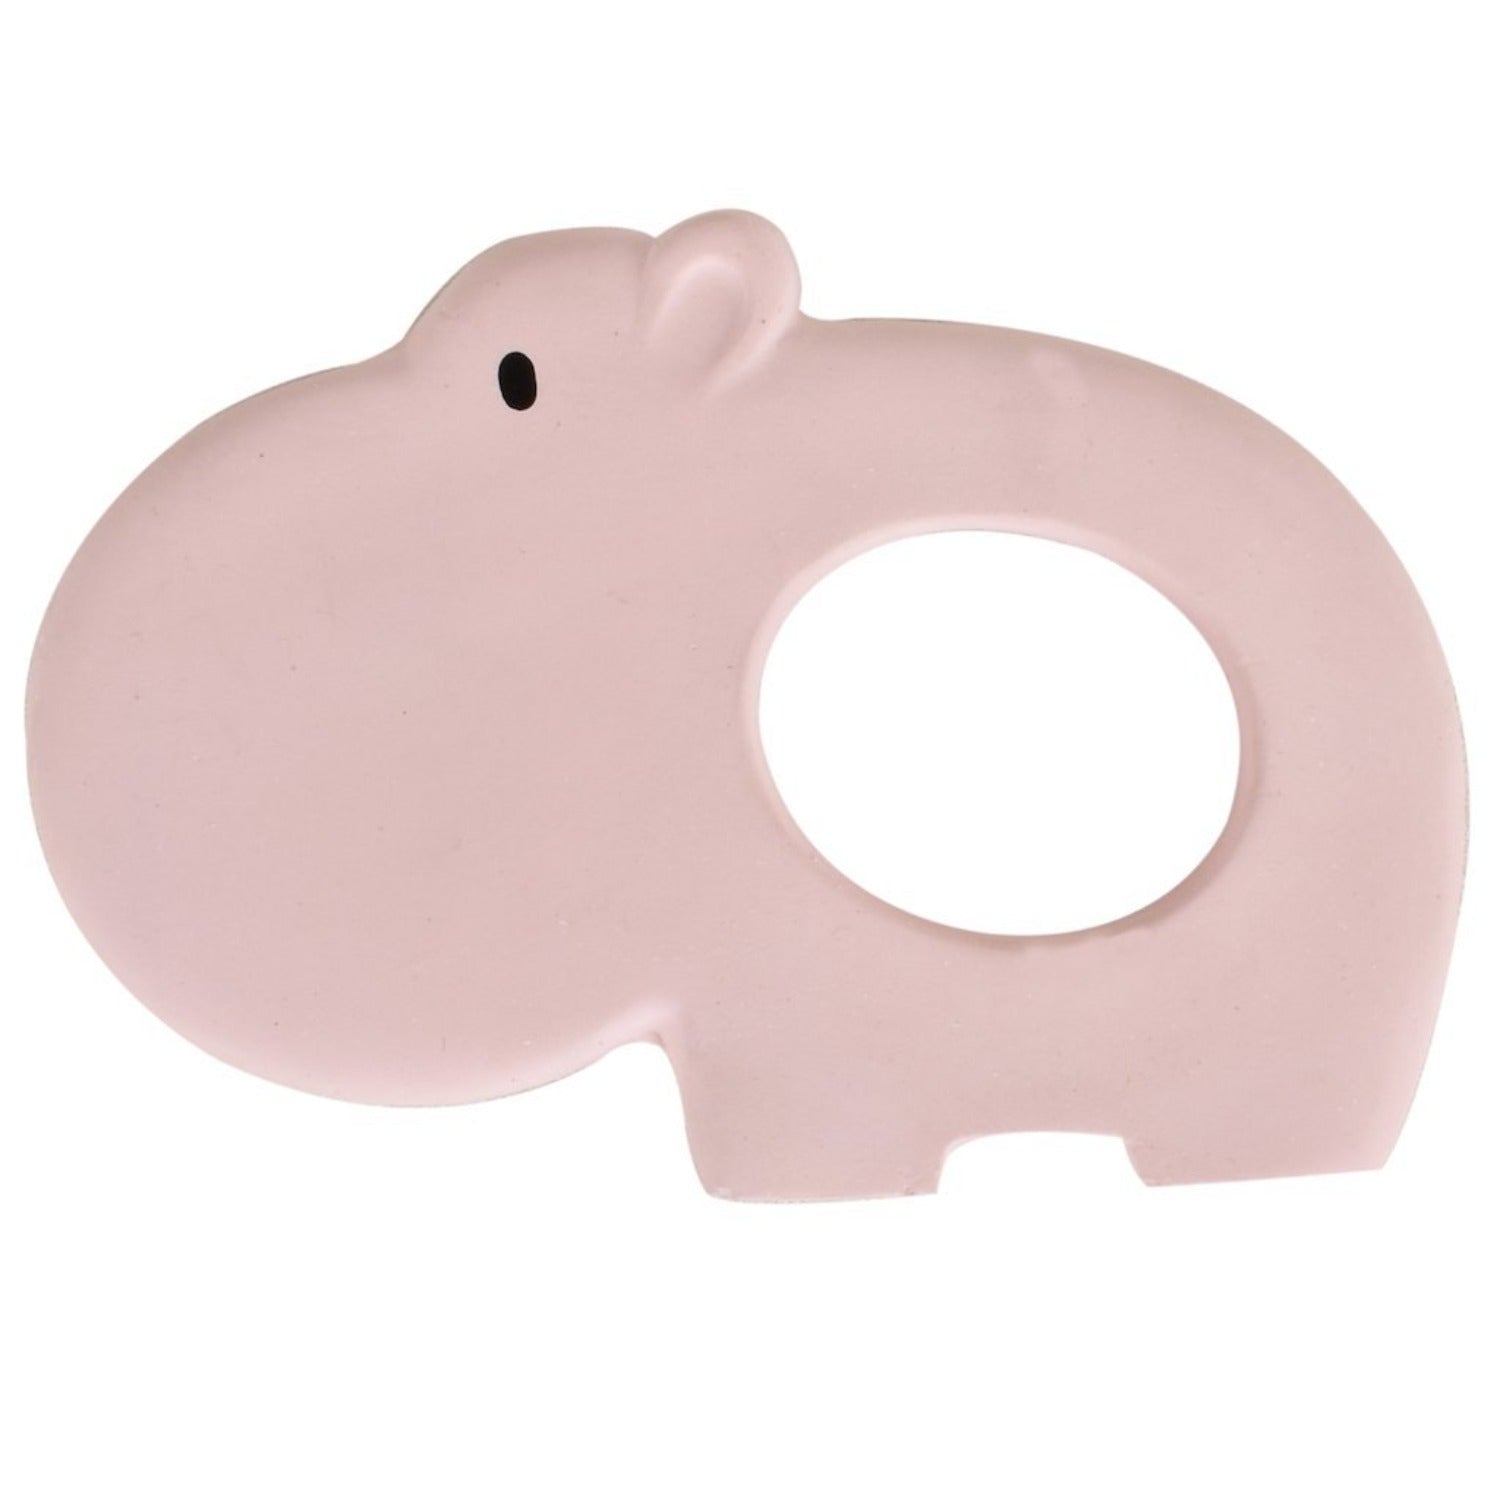 Hippo Natural Rubber Teether